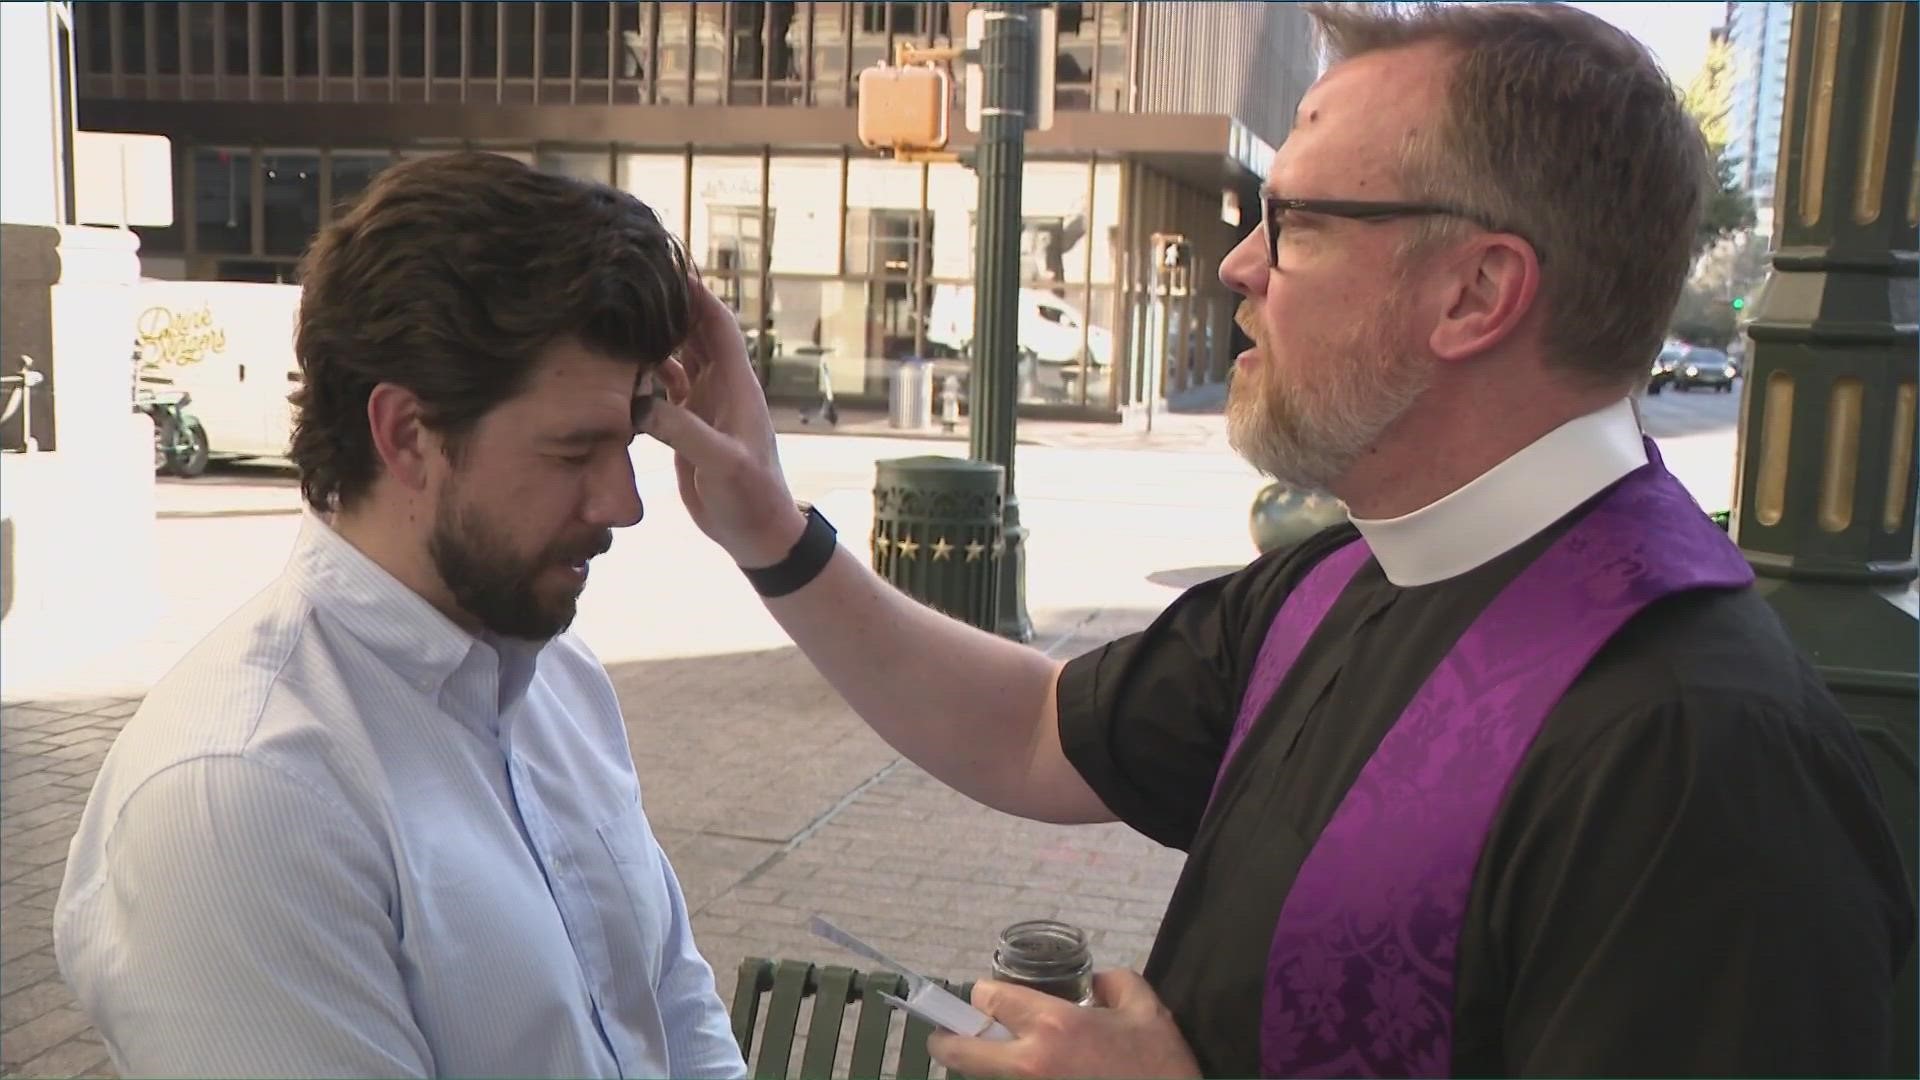 Some Austinites got their ashes "to-go" in Downtown Austin for Ash Wednesday.